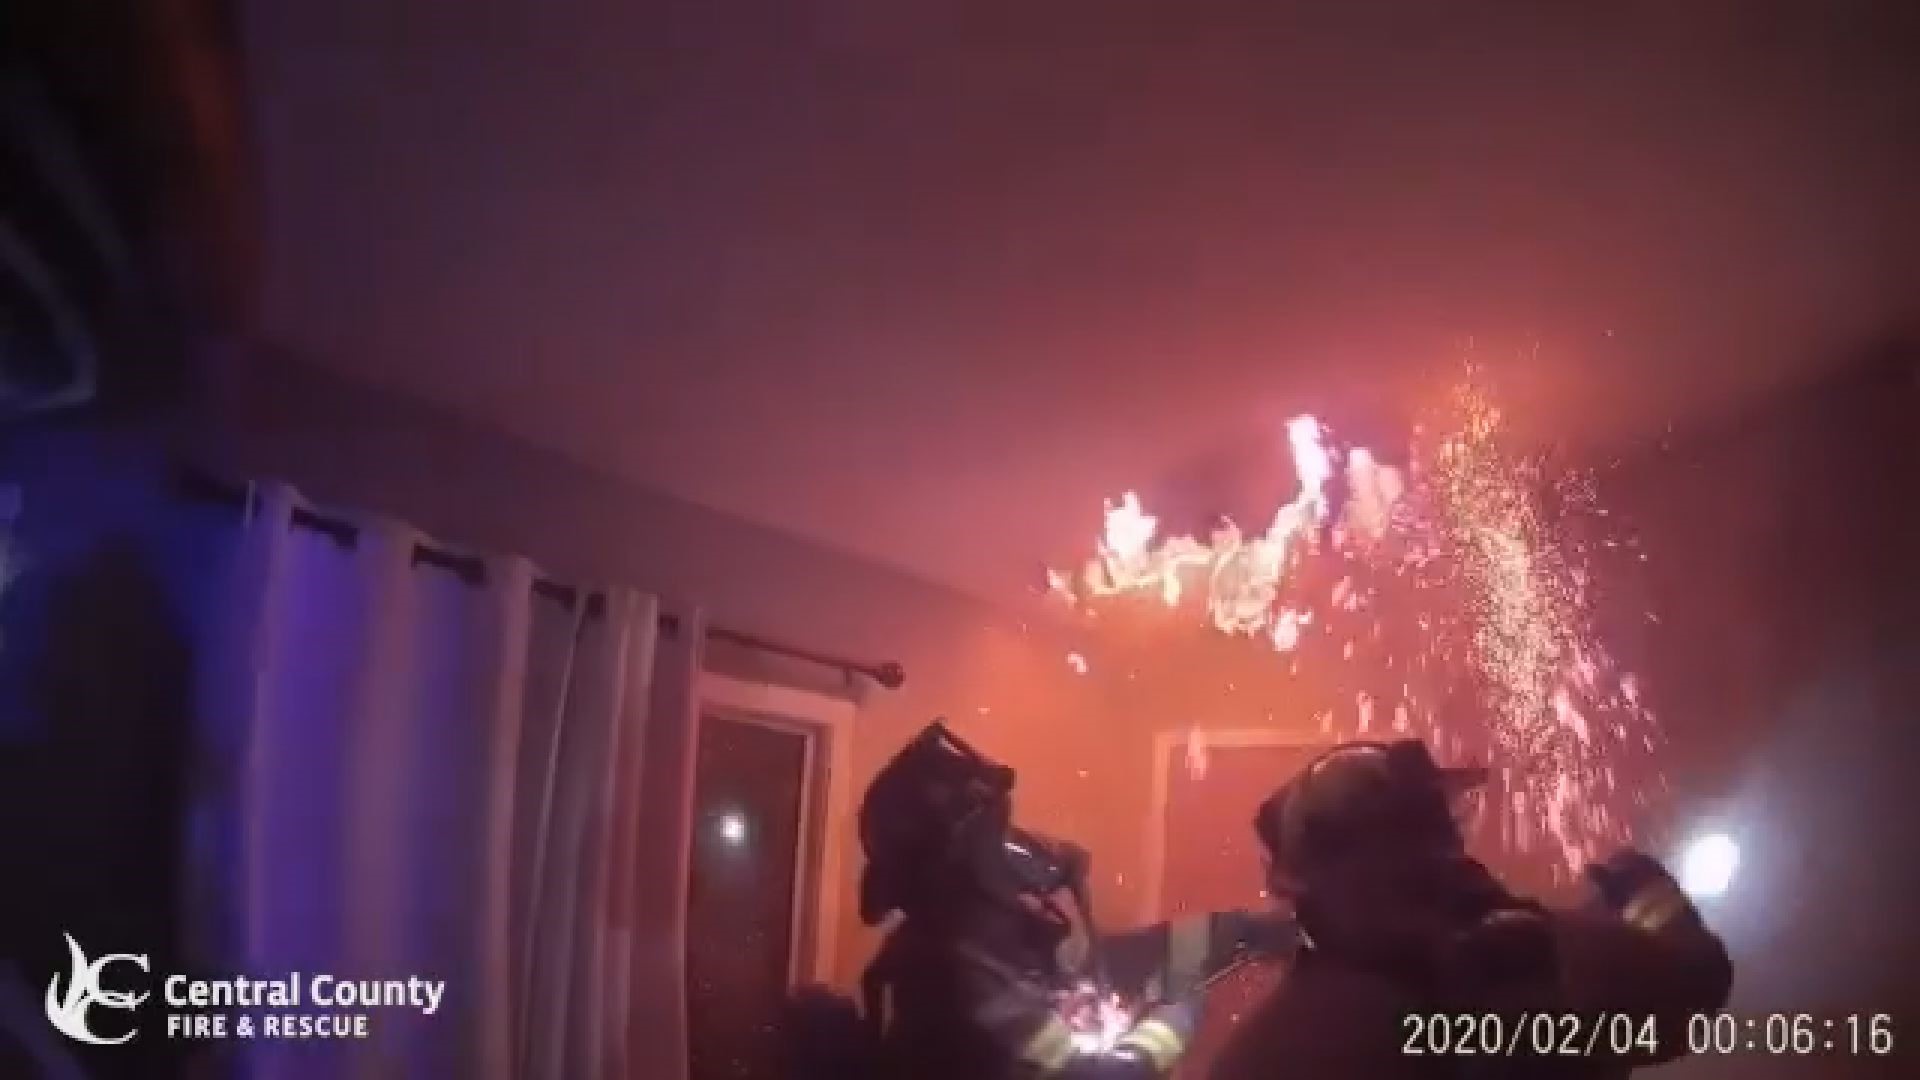 Central County Fire and Rescue posted this helmet cam video on Facebook.